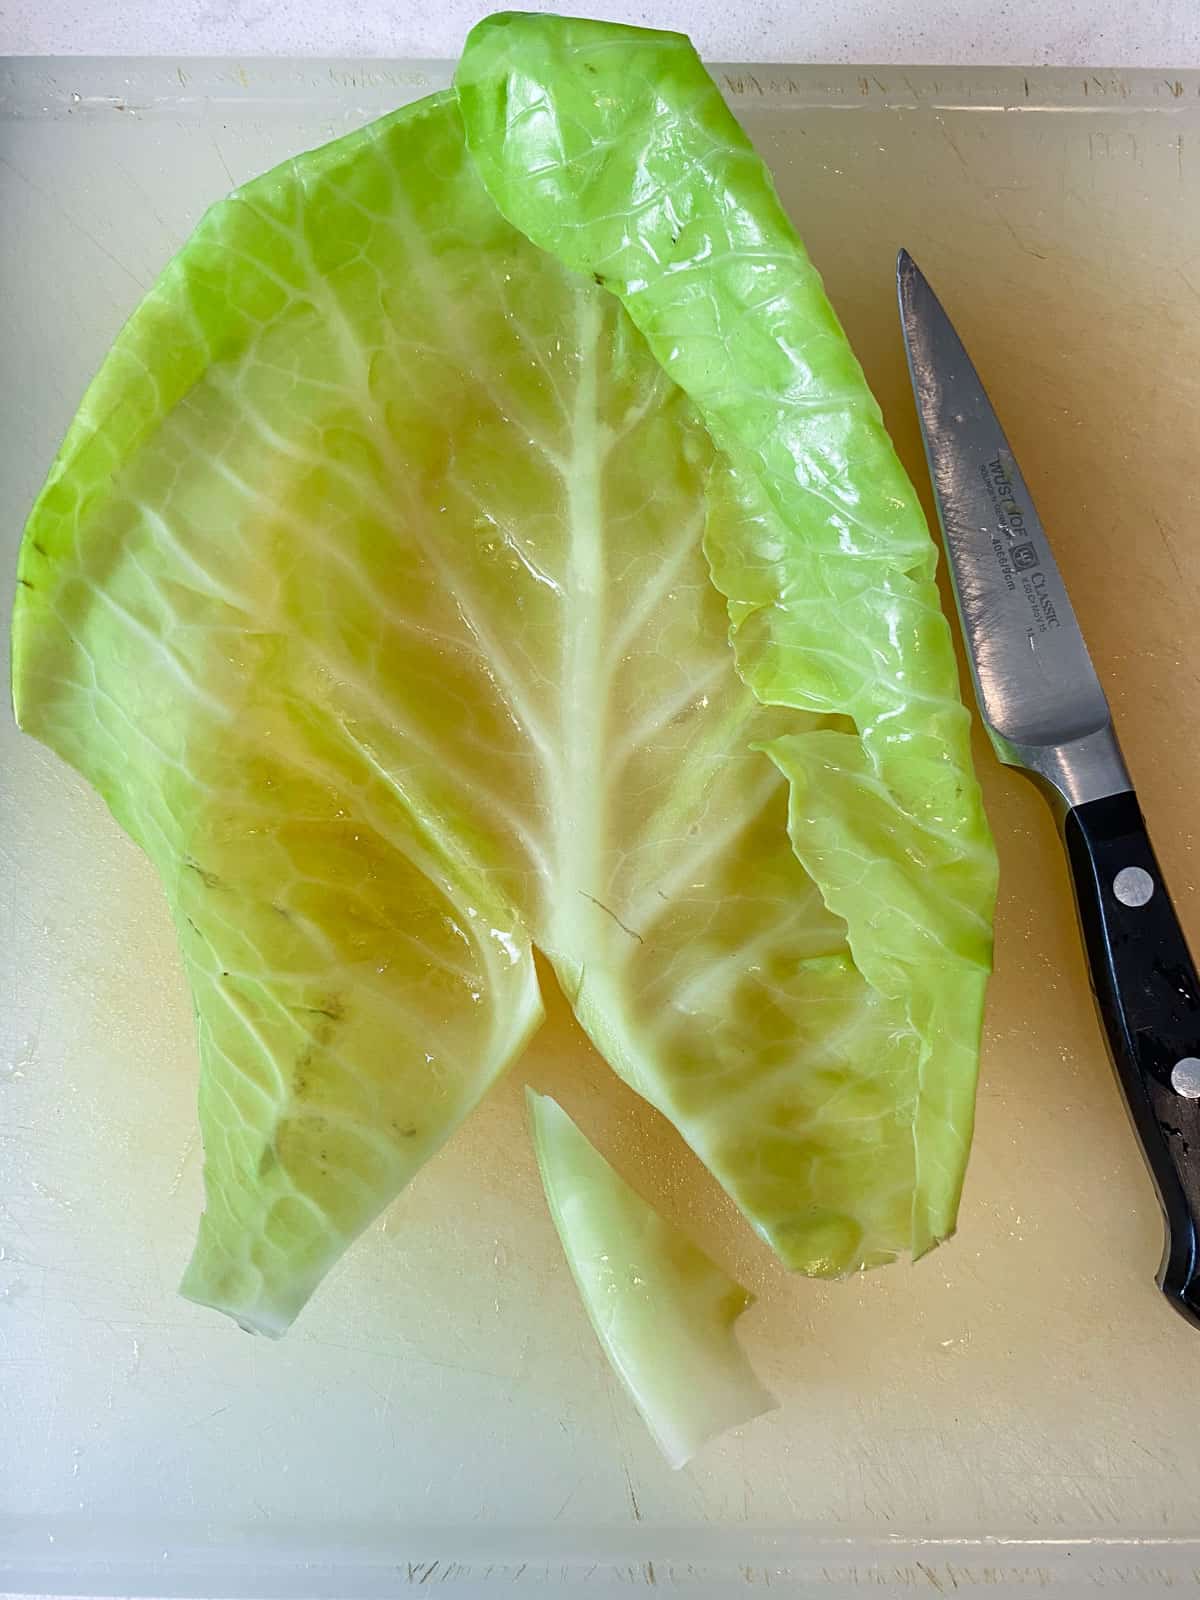 Use a paring knife to remove the thick stem from the cabbage leaf.